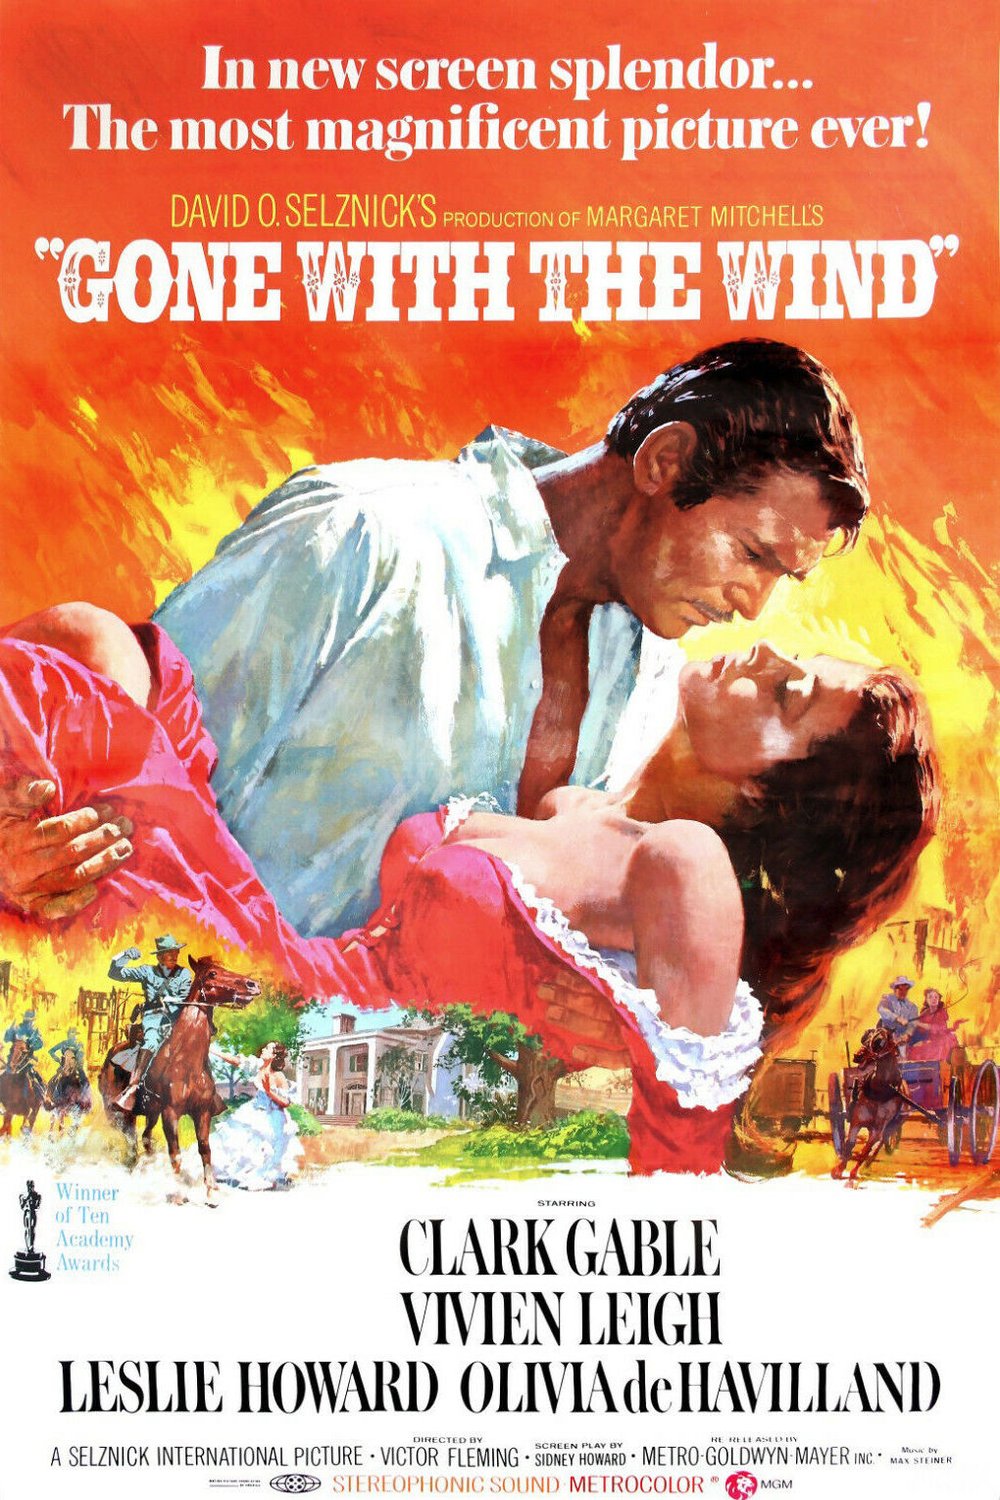 Poster of the movie Gone with the Wind